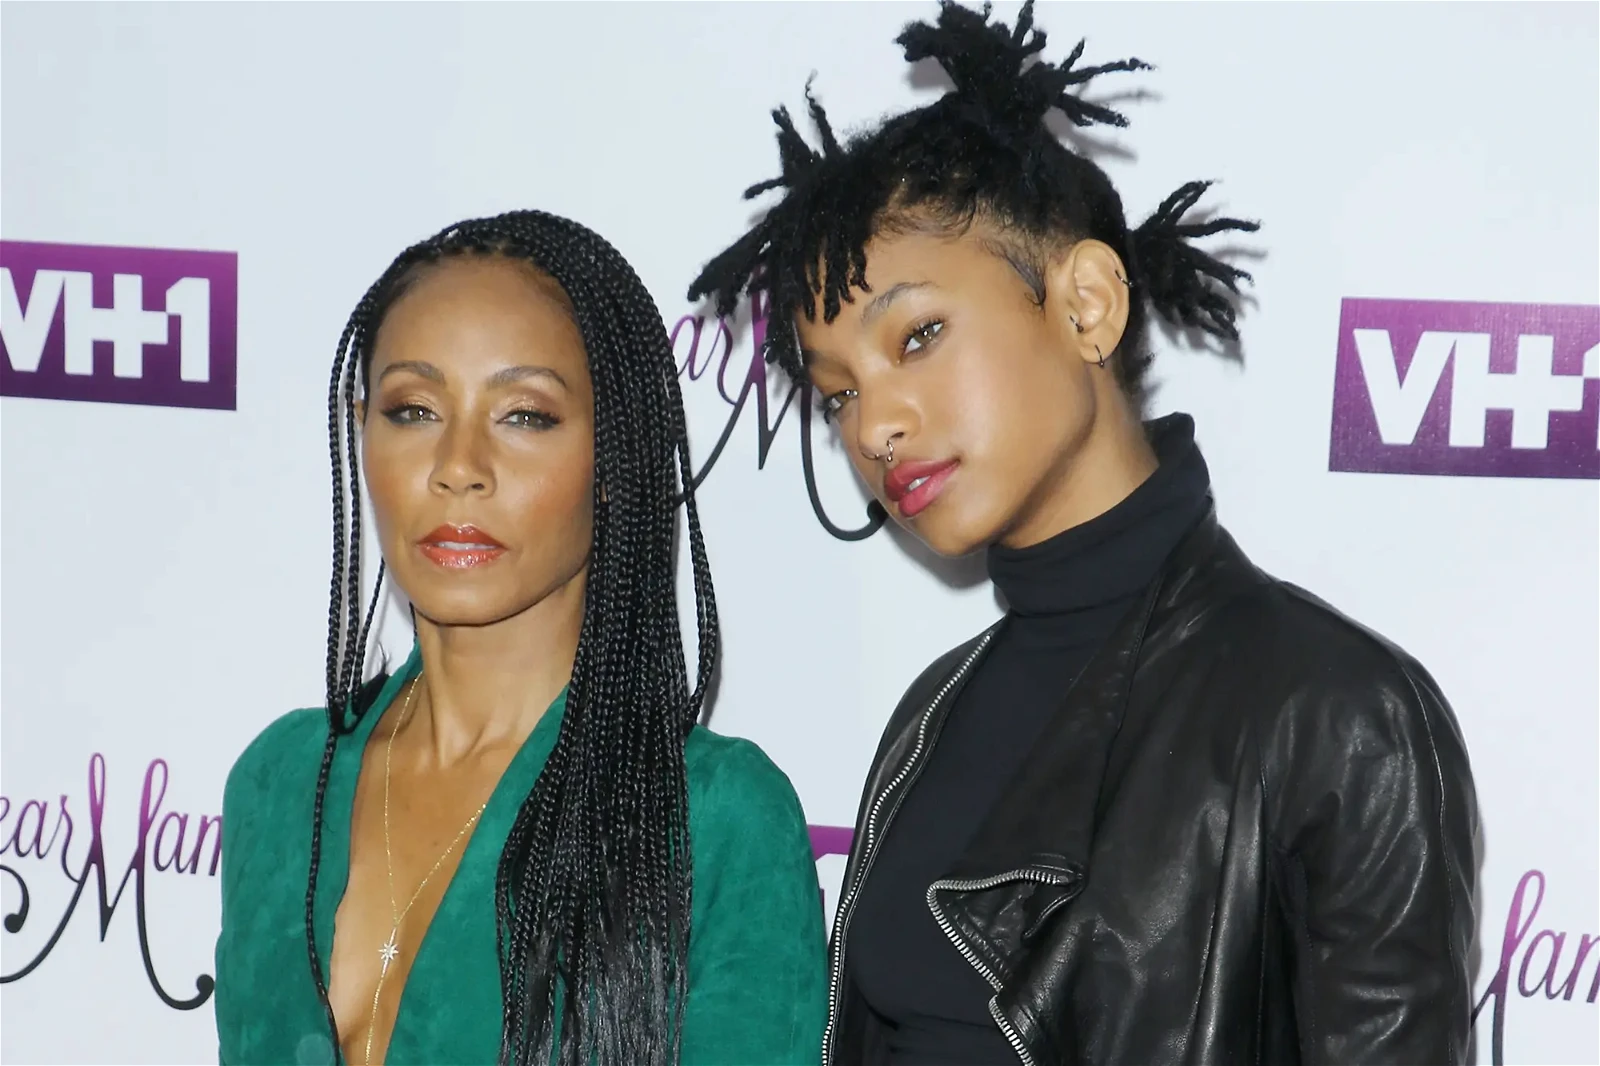 Jada Pinkett Smith with her daughter Willow Smith